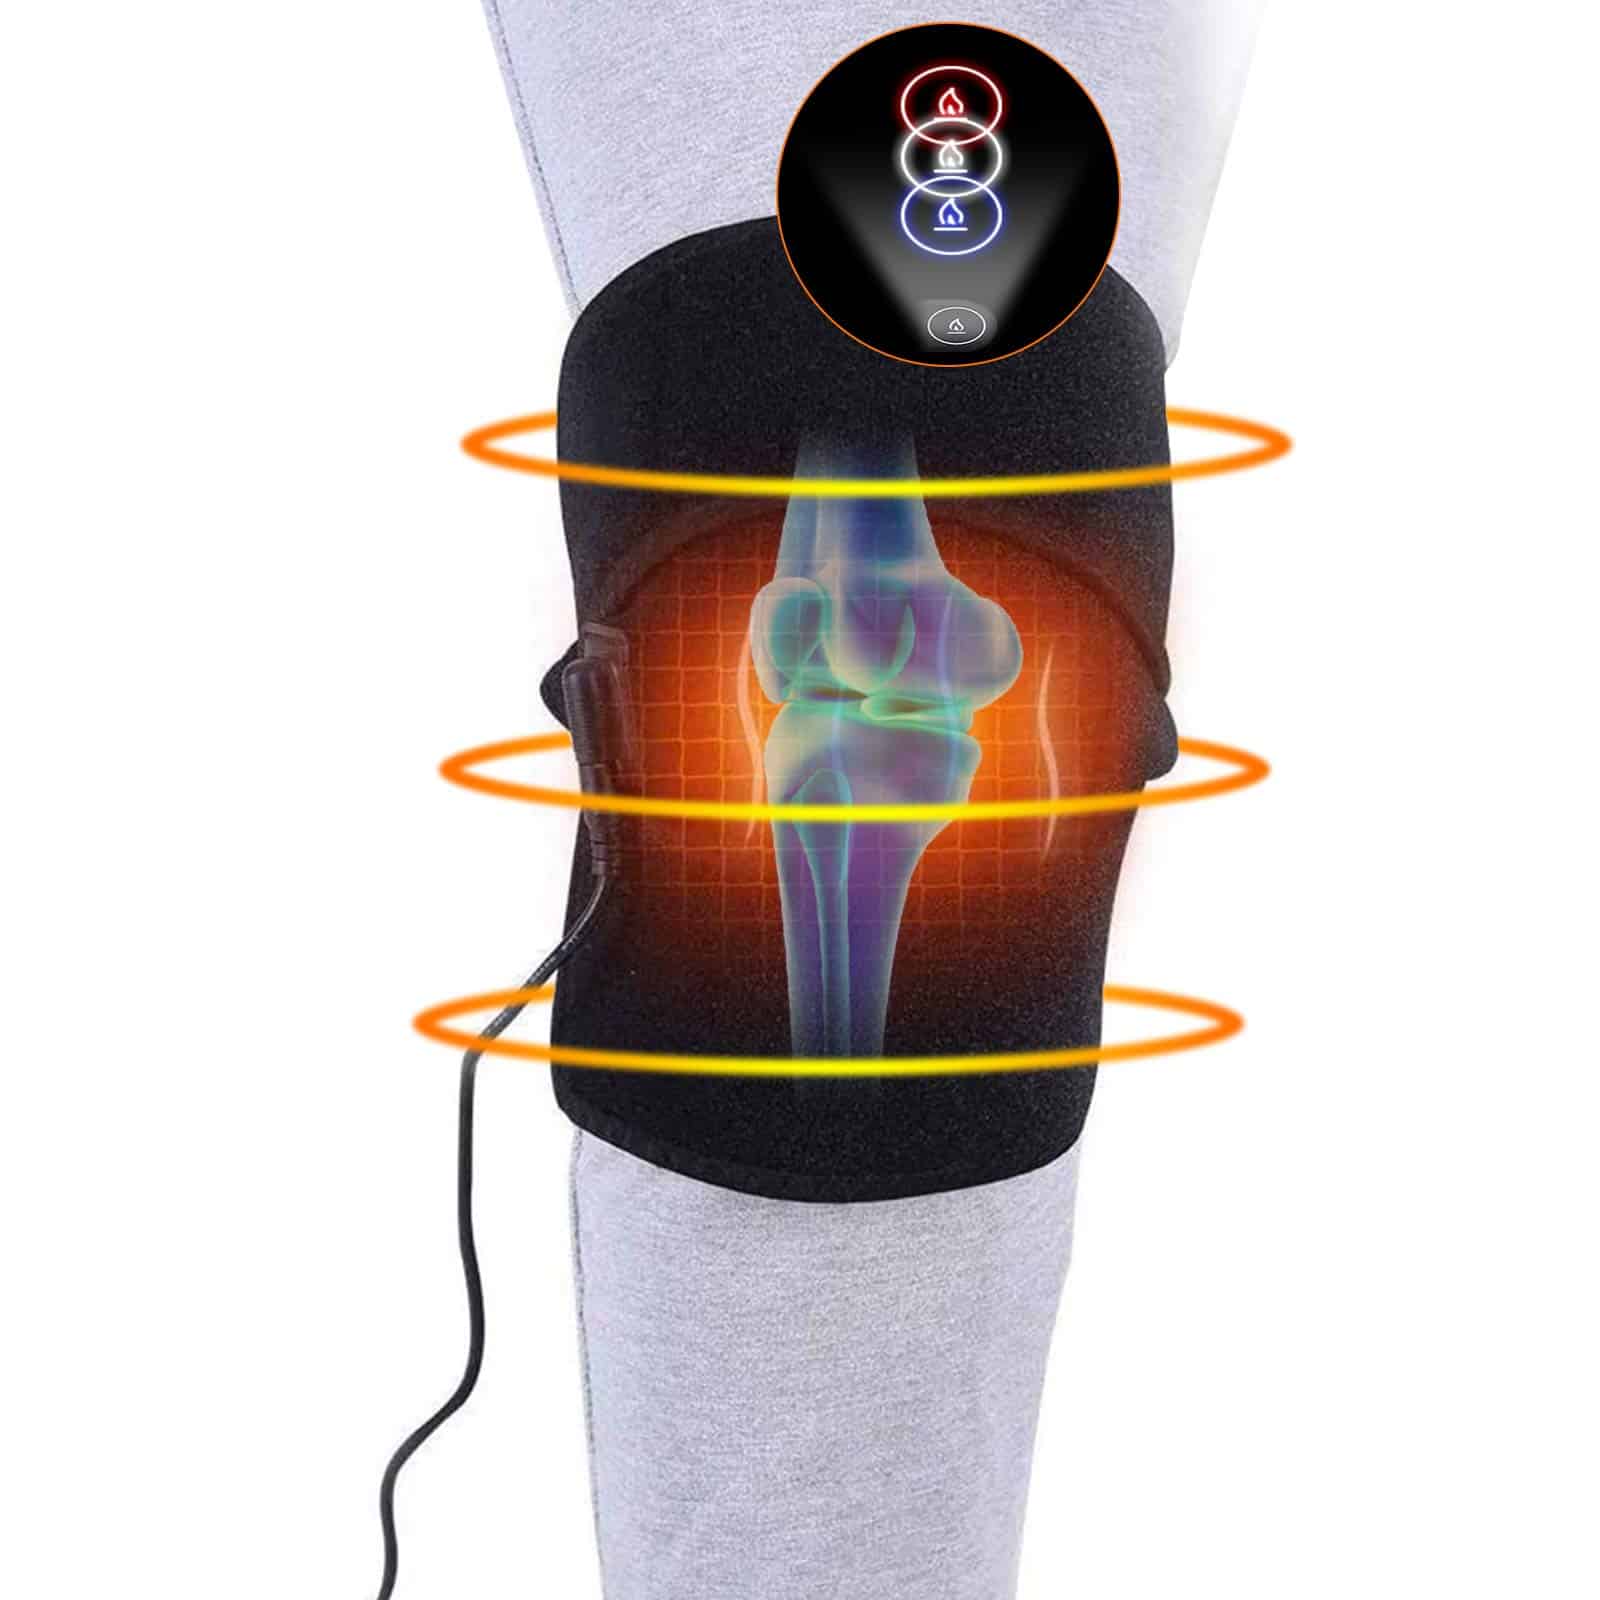 DOACT Heat Knee Brace for Hot or Cold Therapy, USB Heating Knee Pad ...